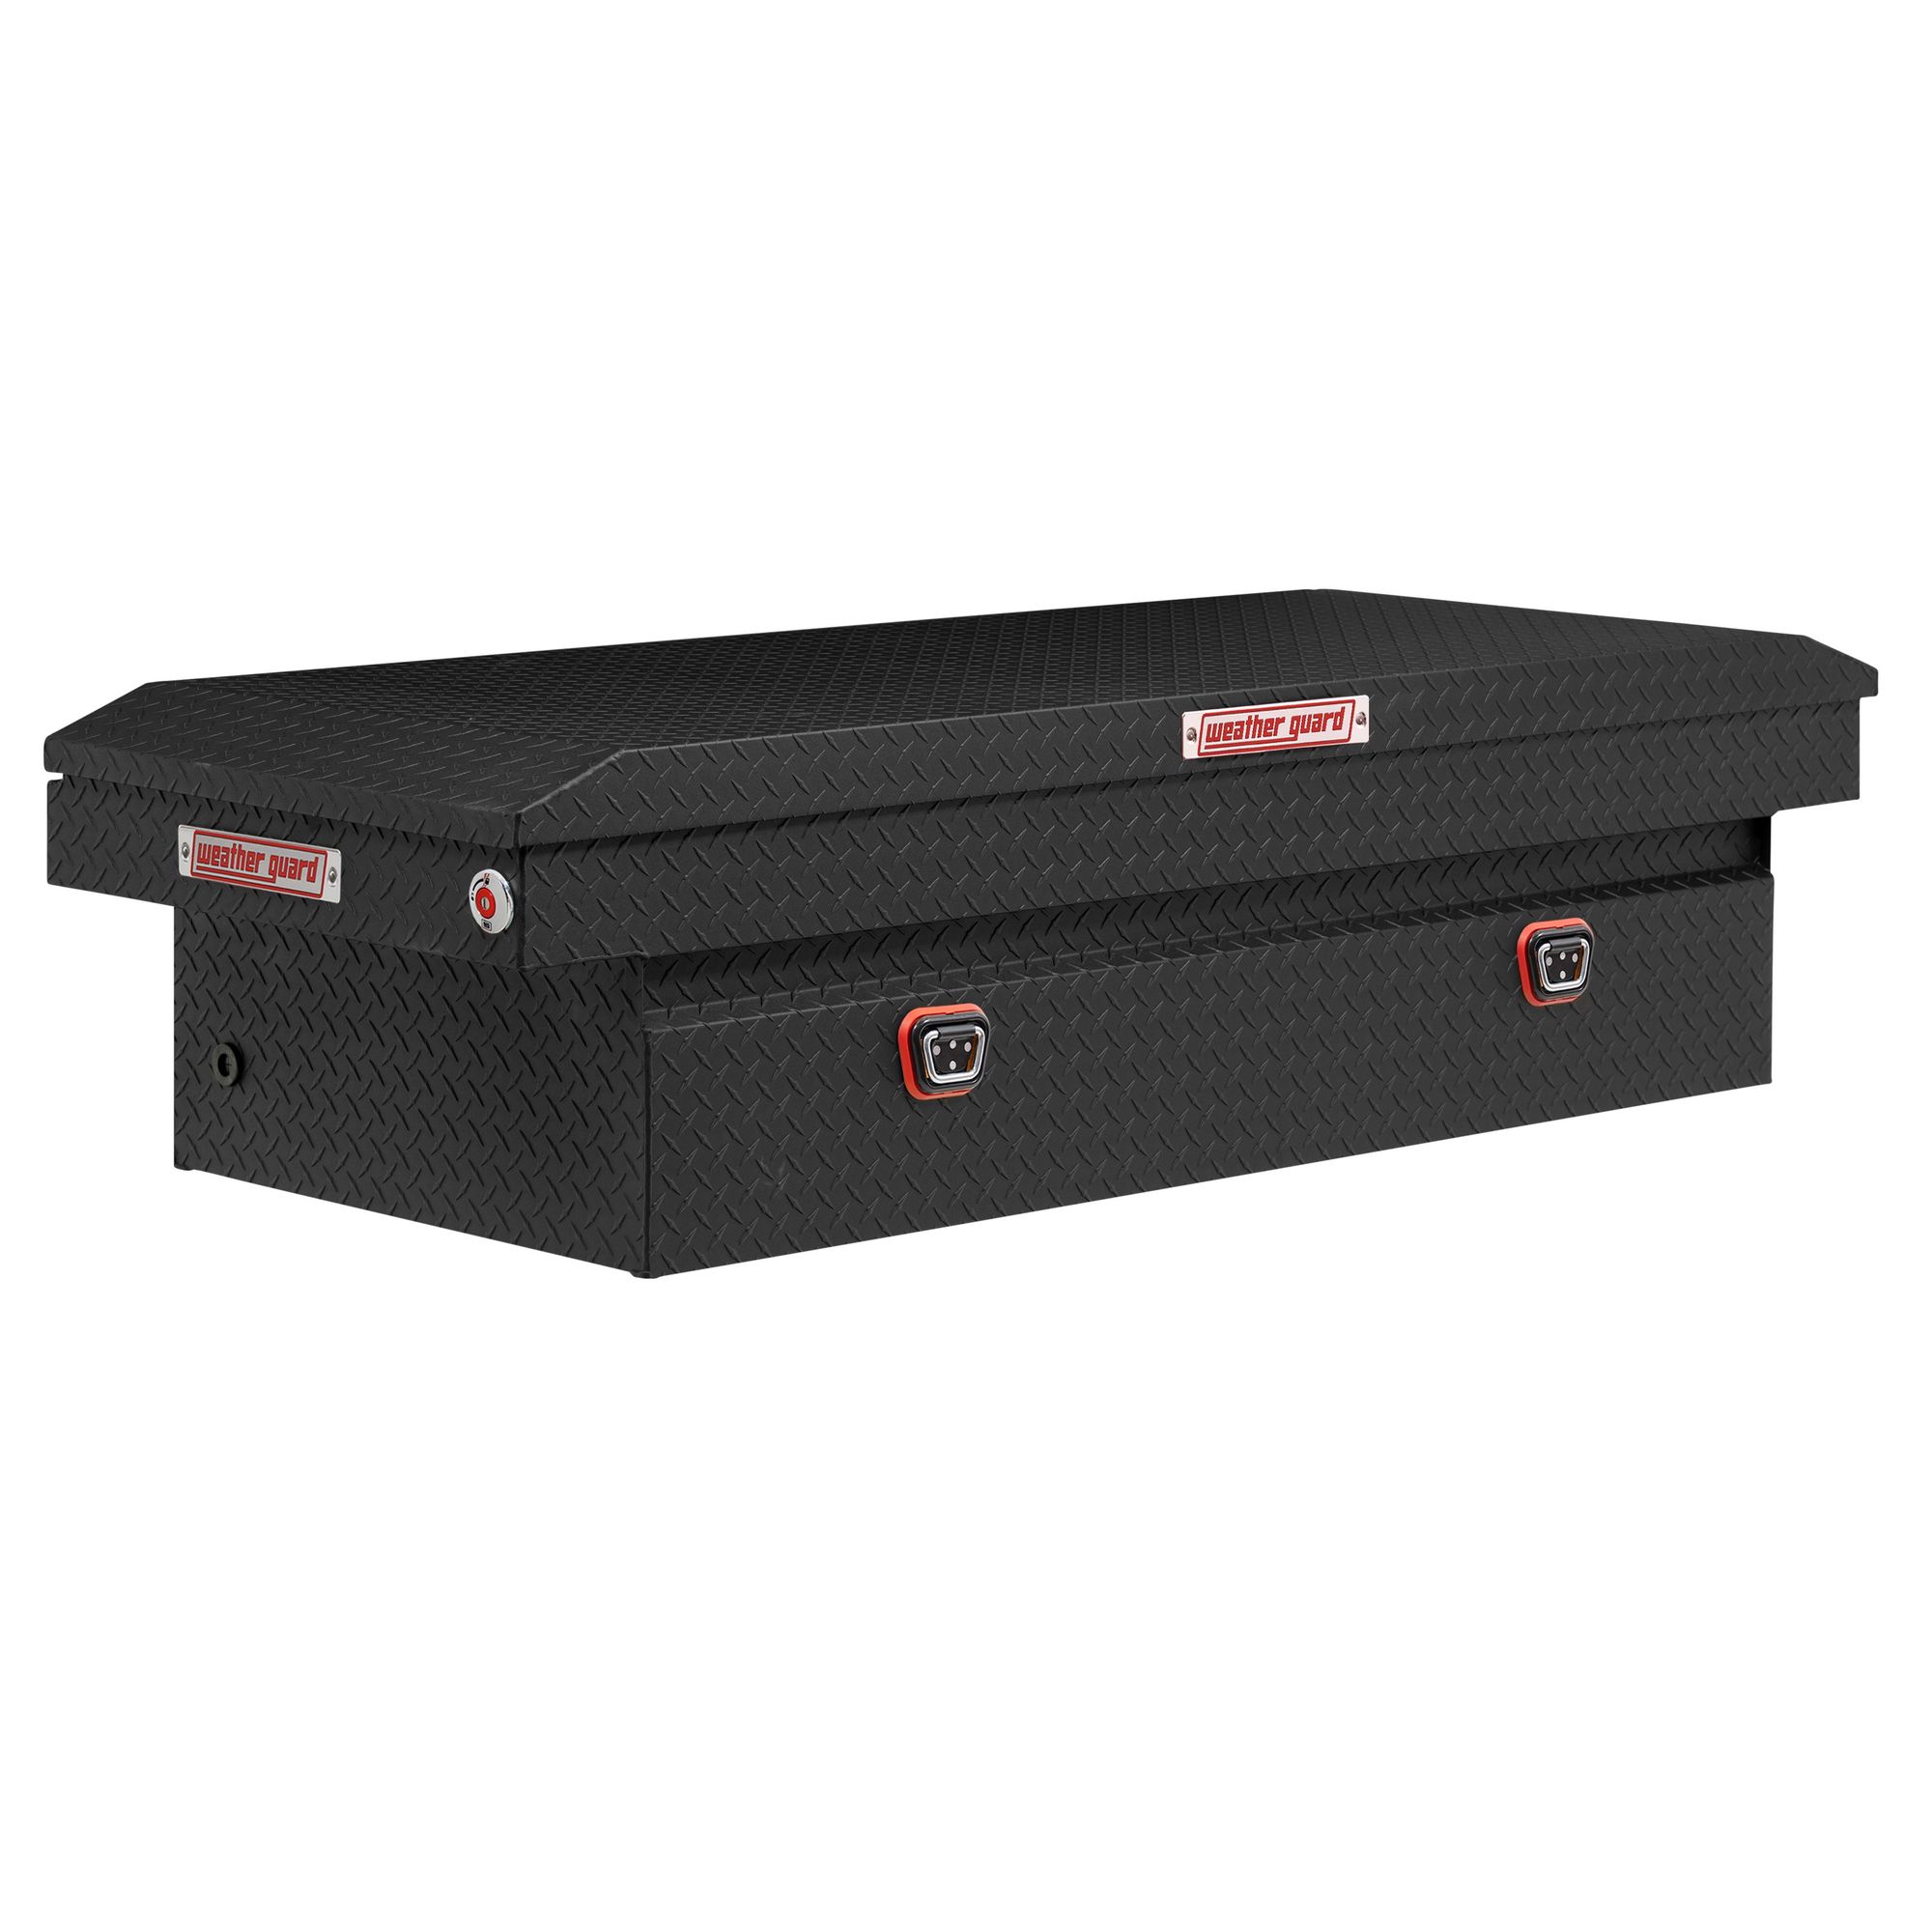 Weather Guard, 71Inch L Saddle Box, Full Extra Wide, Width 72 in, Material Aluminum, Color Finish Textured Matte Black, Model 117-52-04